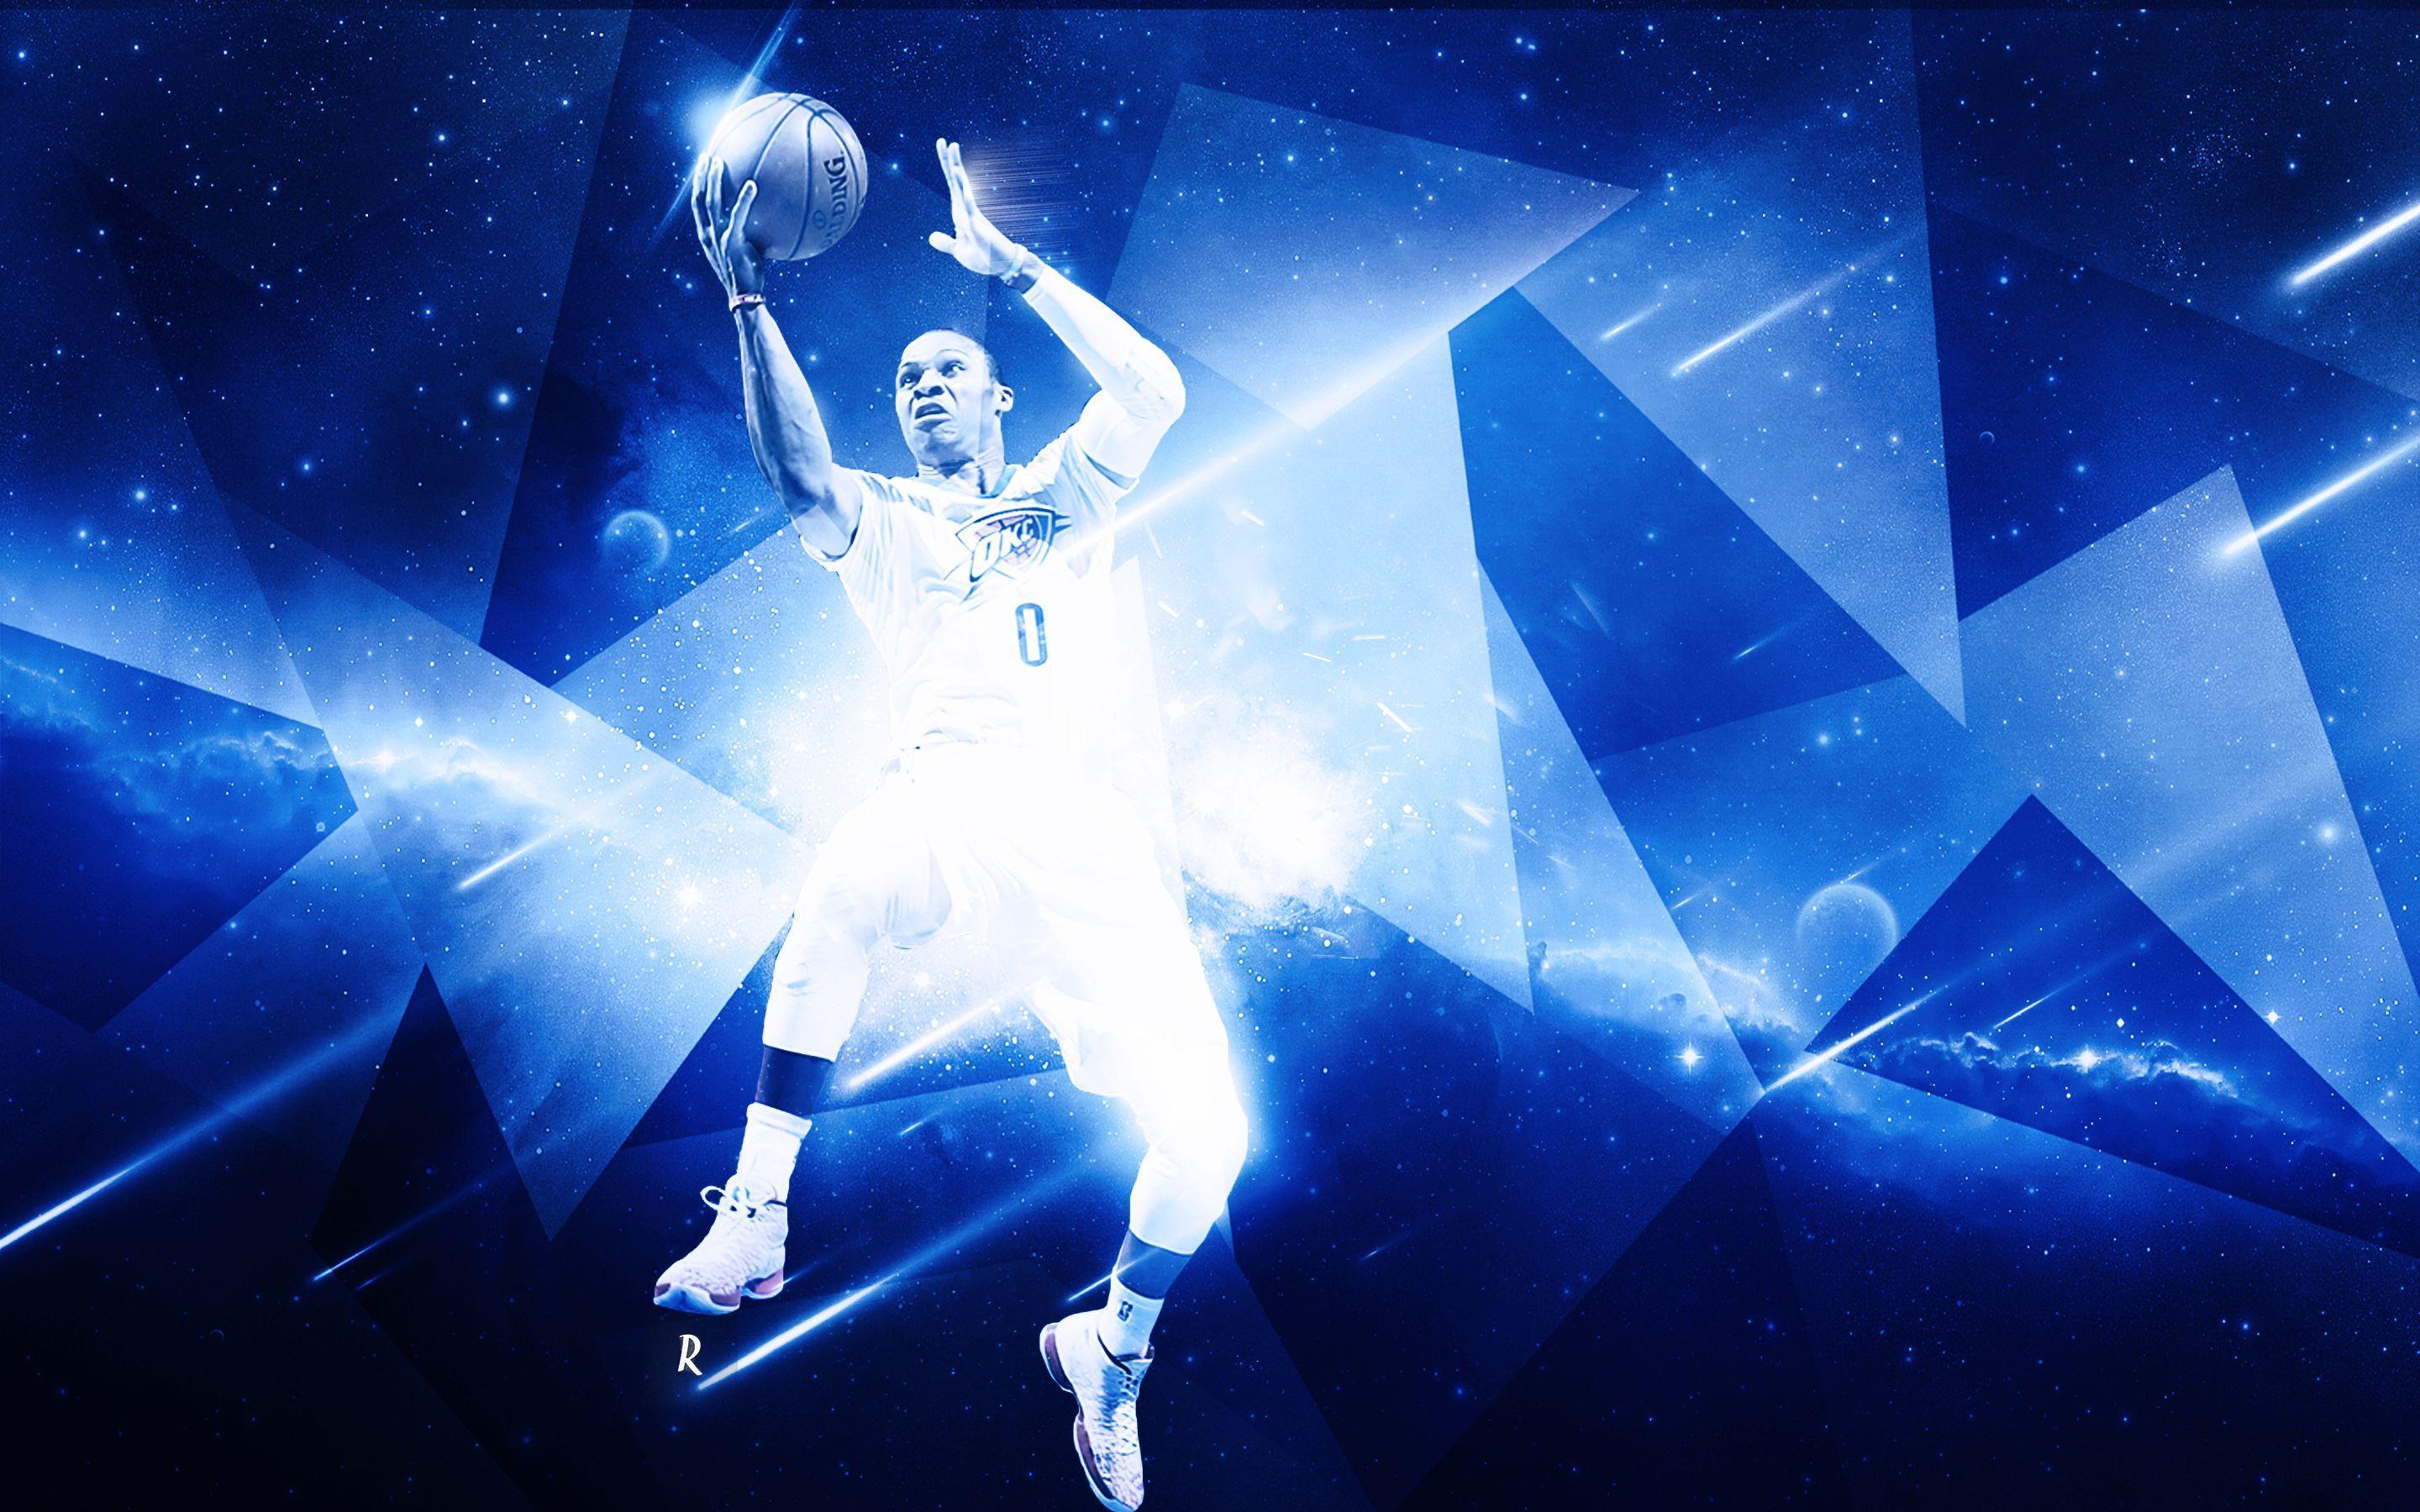 Russell Westbrook Wallpapers by rubanarts